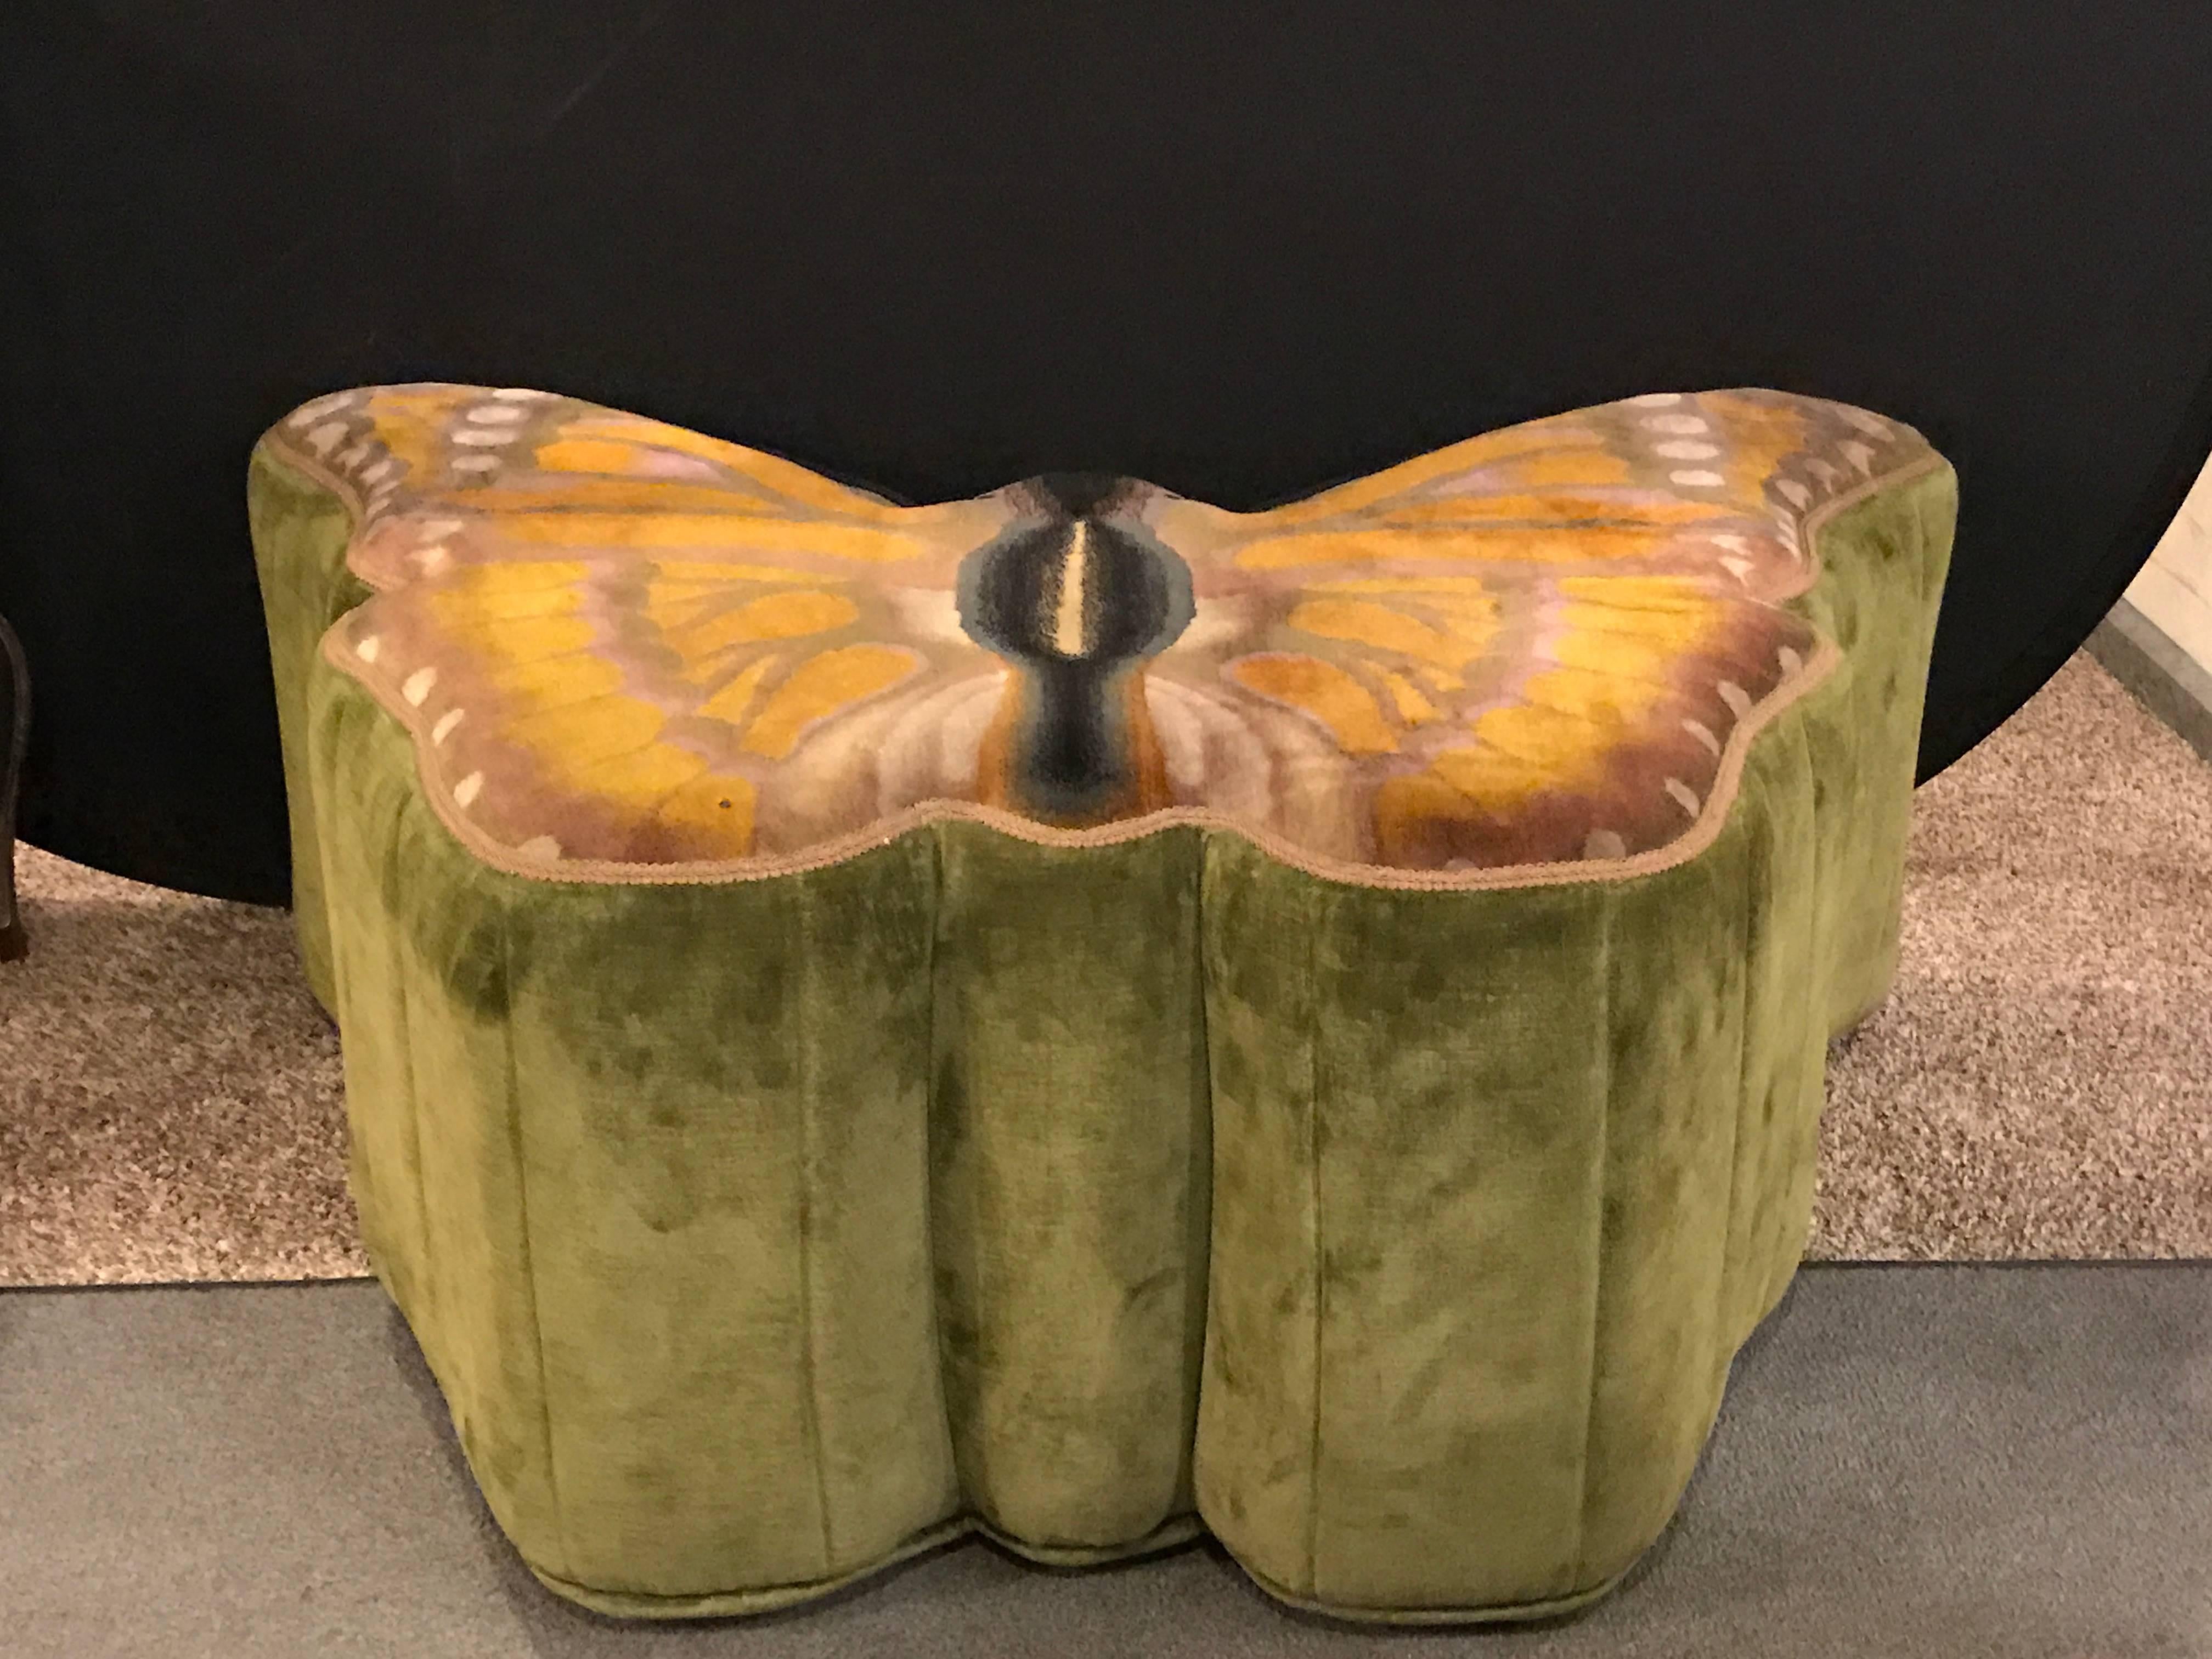 Palatial butterfly ottoman pouf. This wonderfully decorative custom-made pouf depicts a bright and colorful butterfly.